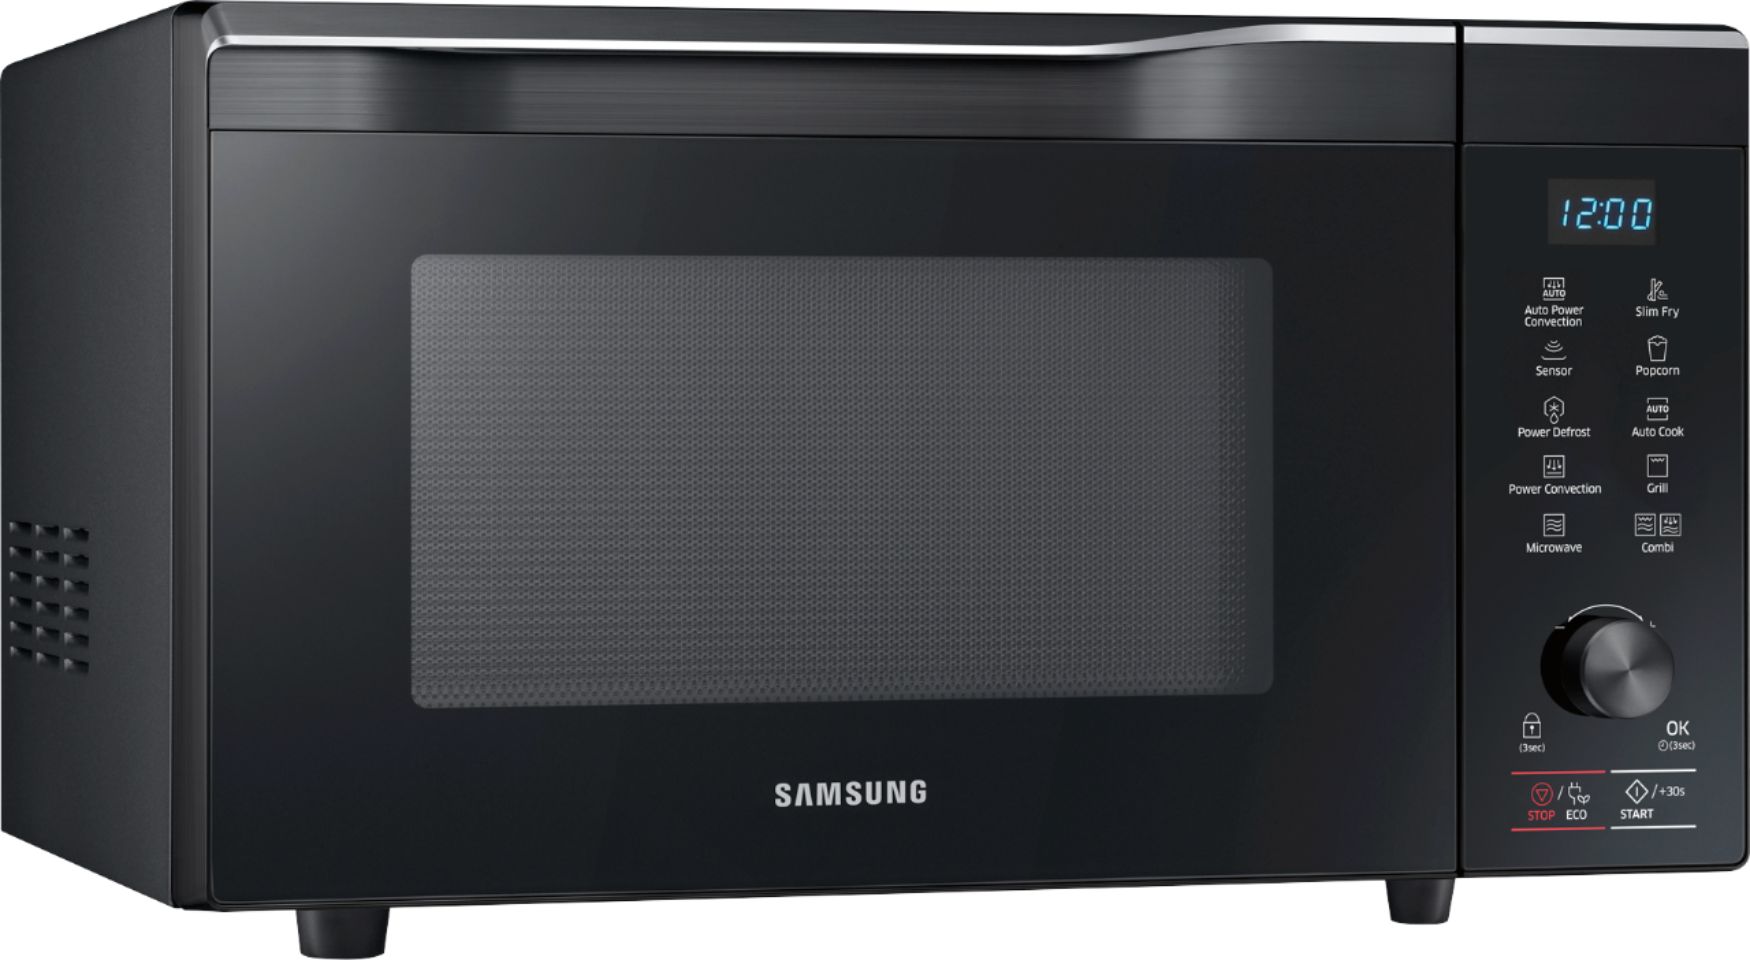 Angle View: Samsung - 1.1 Cu. Ft. Countertop Convection Microwave with Sensor Cook and PowerGrill - Black stainless steel